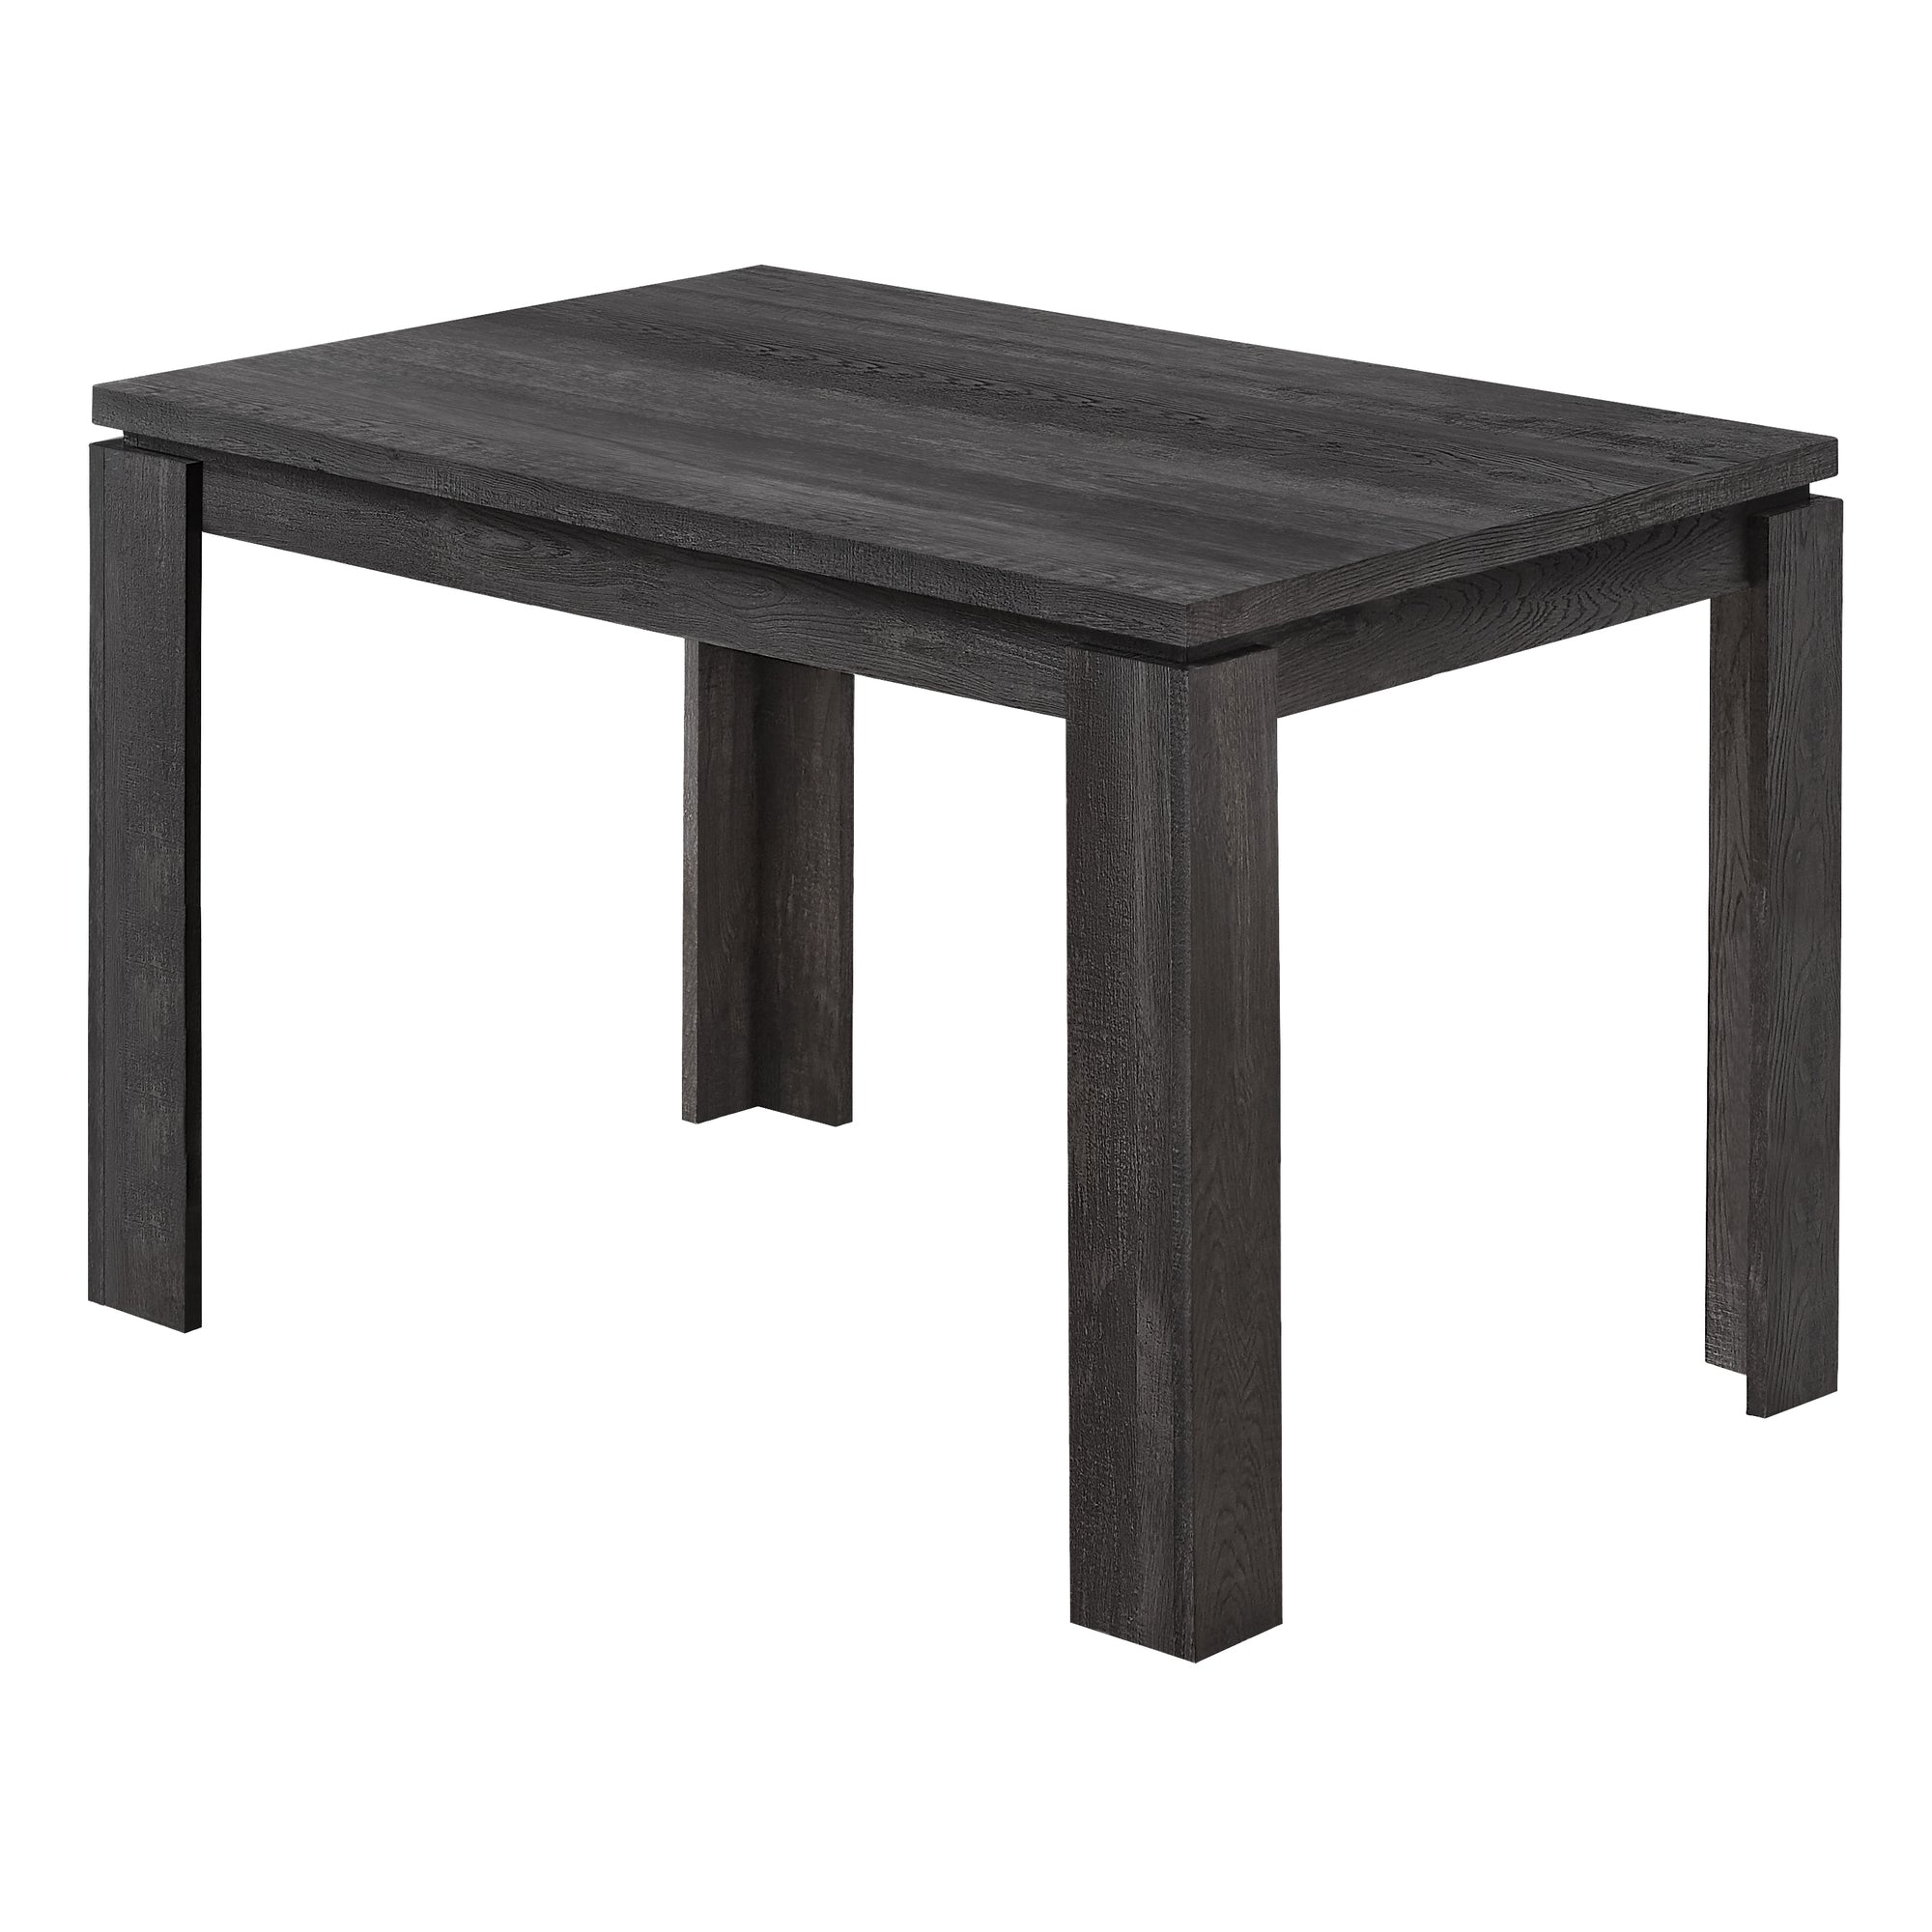 MN-751166    Dining Table, 48" Rectangular, Kitchen, Dining Room, Laminate, Black Reclaimed Wood Look, Contemporary, Modern